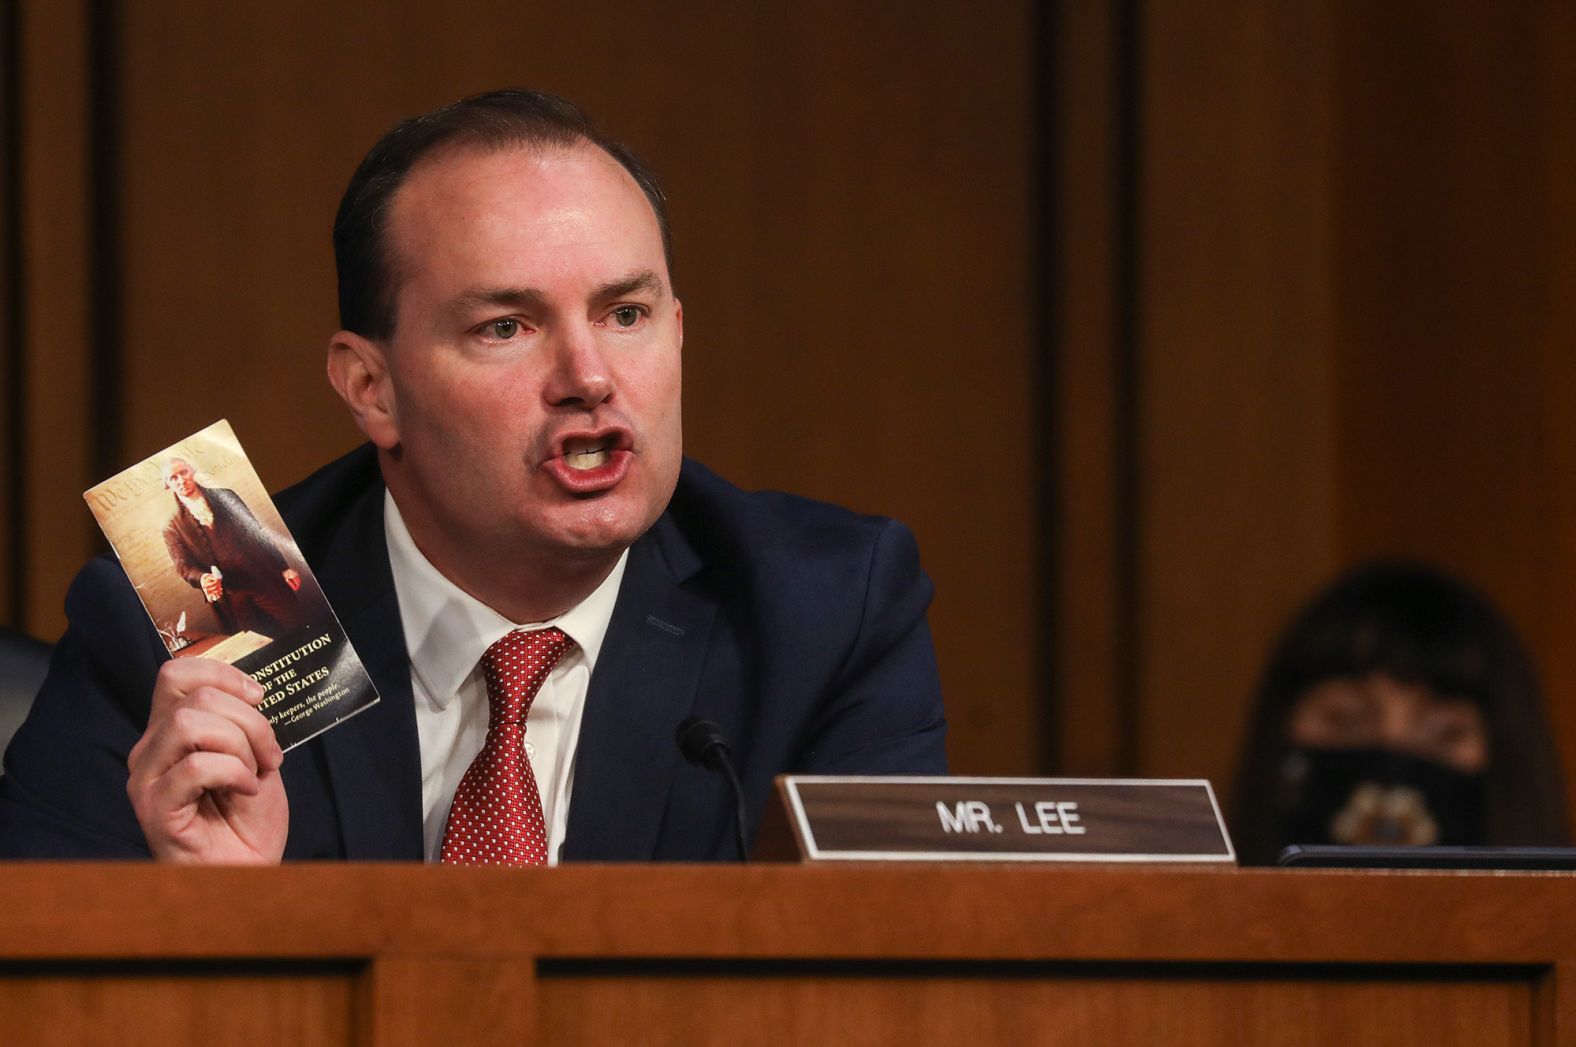 US Sen. Mike Lee, a Republican from Utah, holds up a copy of the US Constitution while speaking on October 12. Lee<a href="index.php?page=&url=https%3A%2F%2Fwww.cnn.com%2F2020%2F10%2F03%2Fpolitics%2Ftrump-covid-amy-coney-barrett-event%2Findex.html" target="_blank"> tested positive for the coronavirus</a> shortly after attending Barrett's nomination ceremony on September 26. He has been cleared by his physician to attend the hearings, he said.